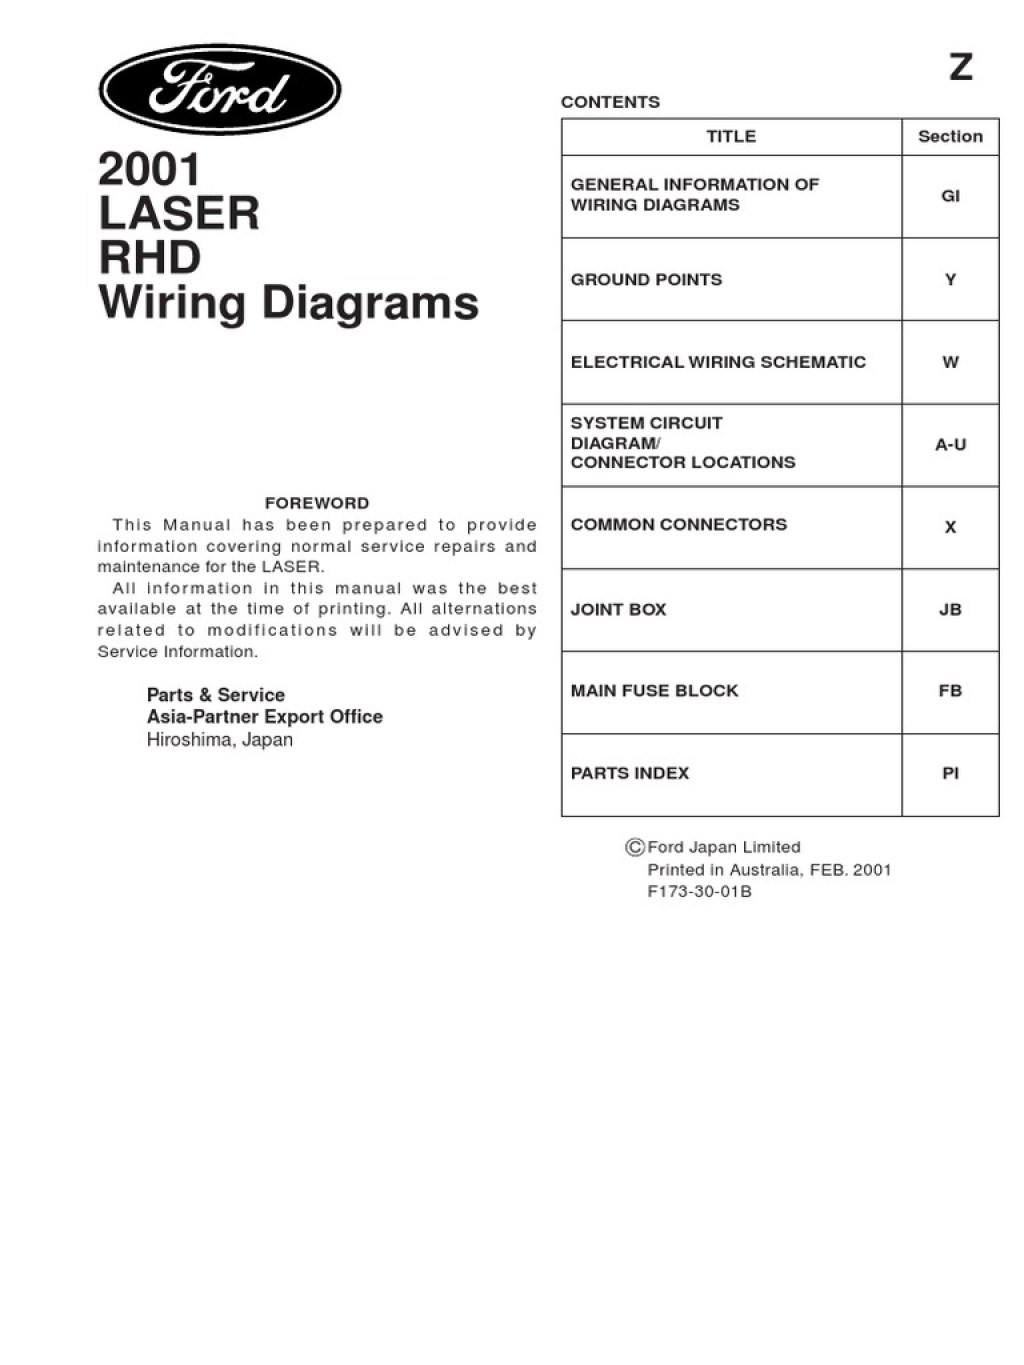 Picture of: Ford Laser Wiring Diagrams  PDF  Electrical Connector  Color